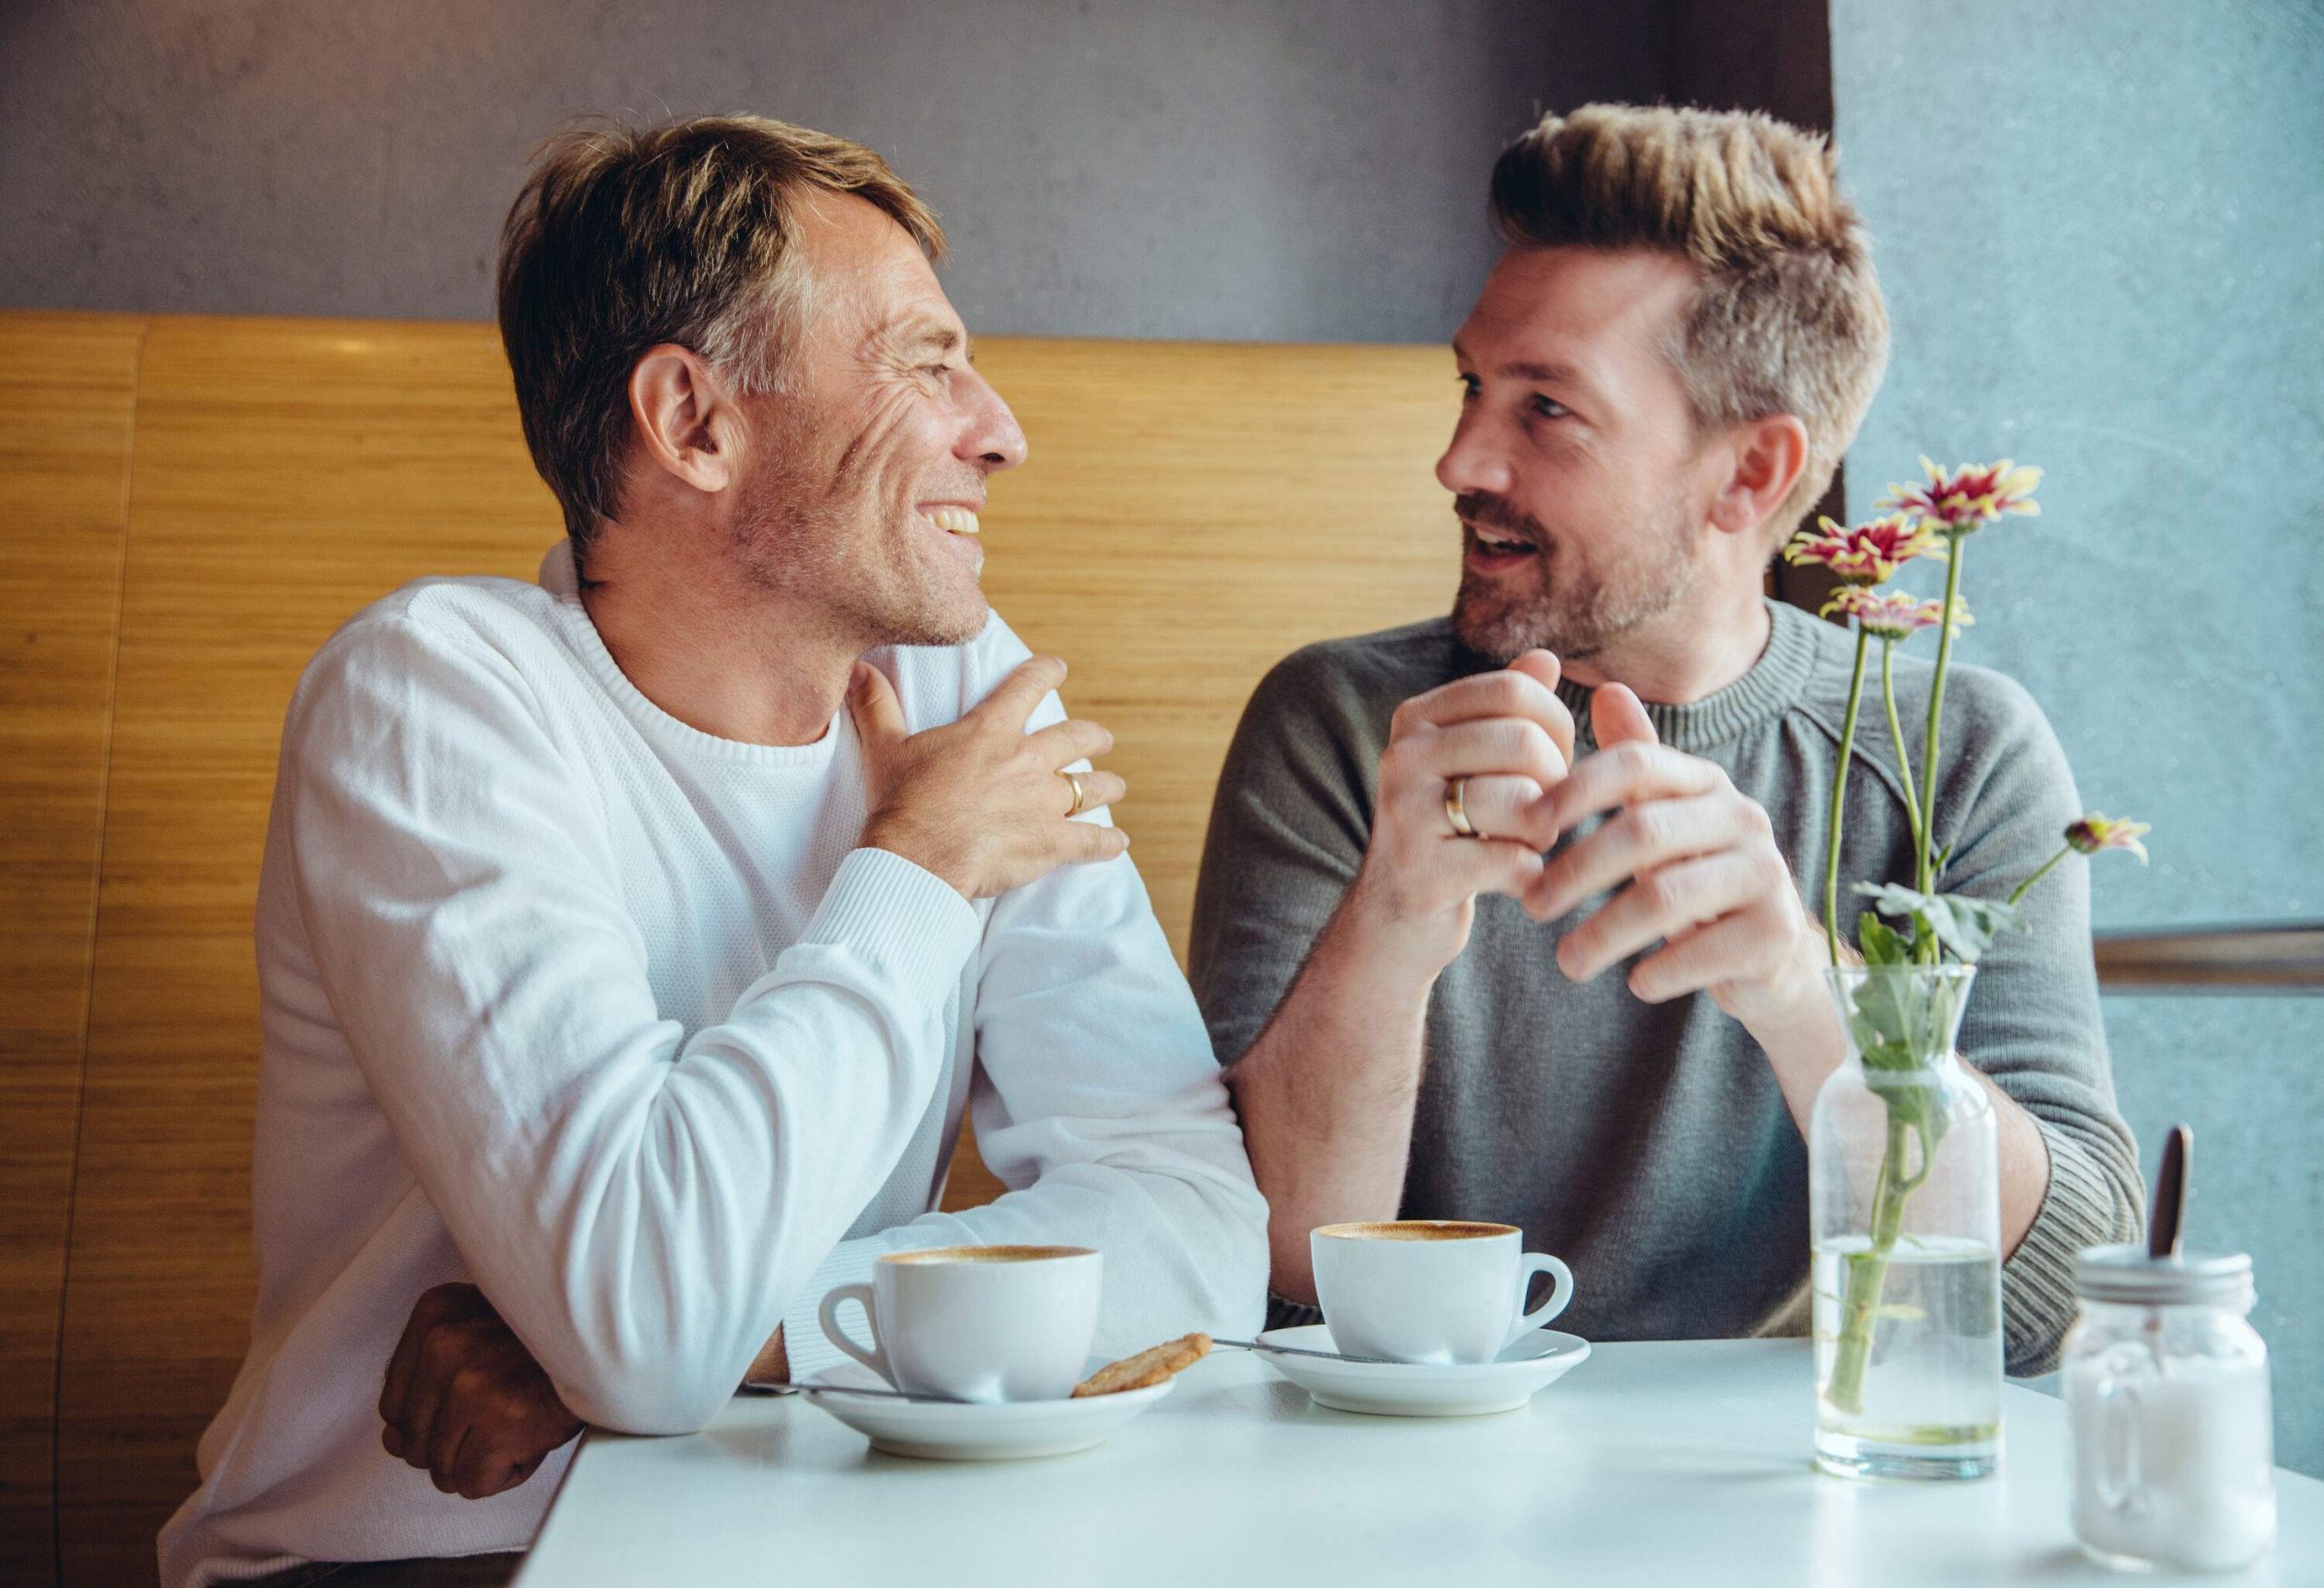 Two men having coffee and chatting with each other.